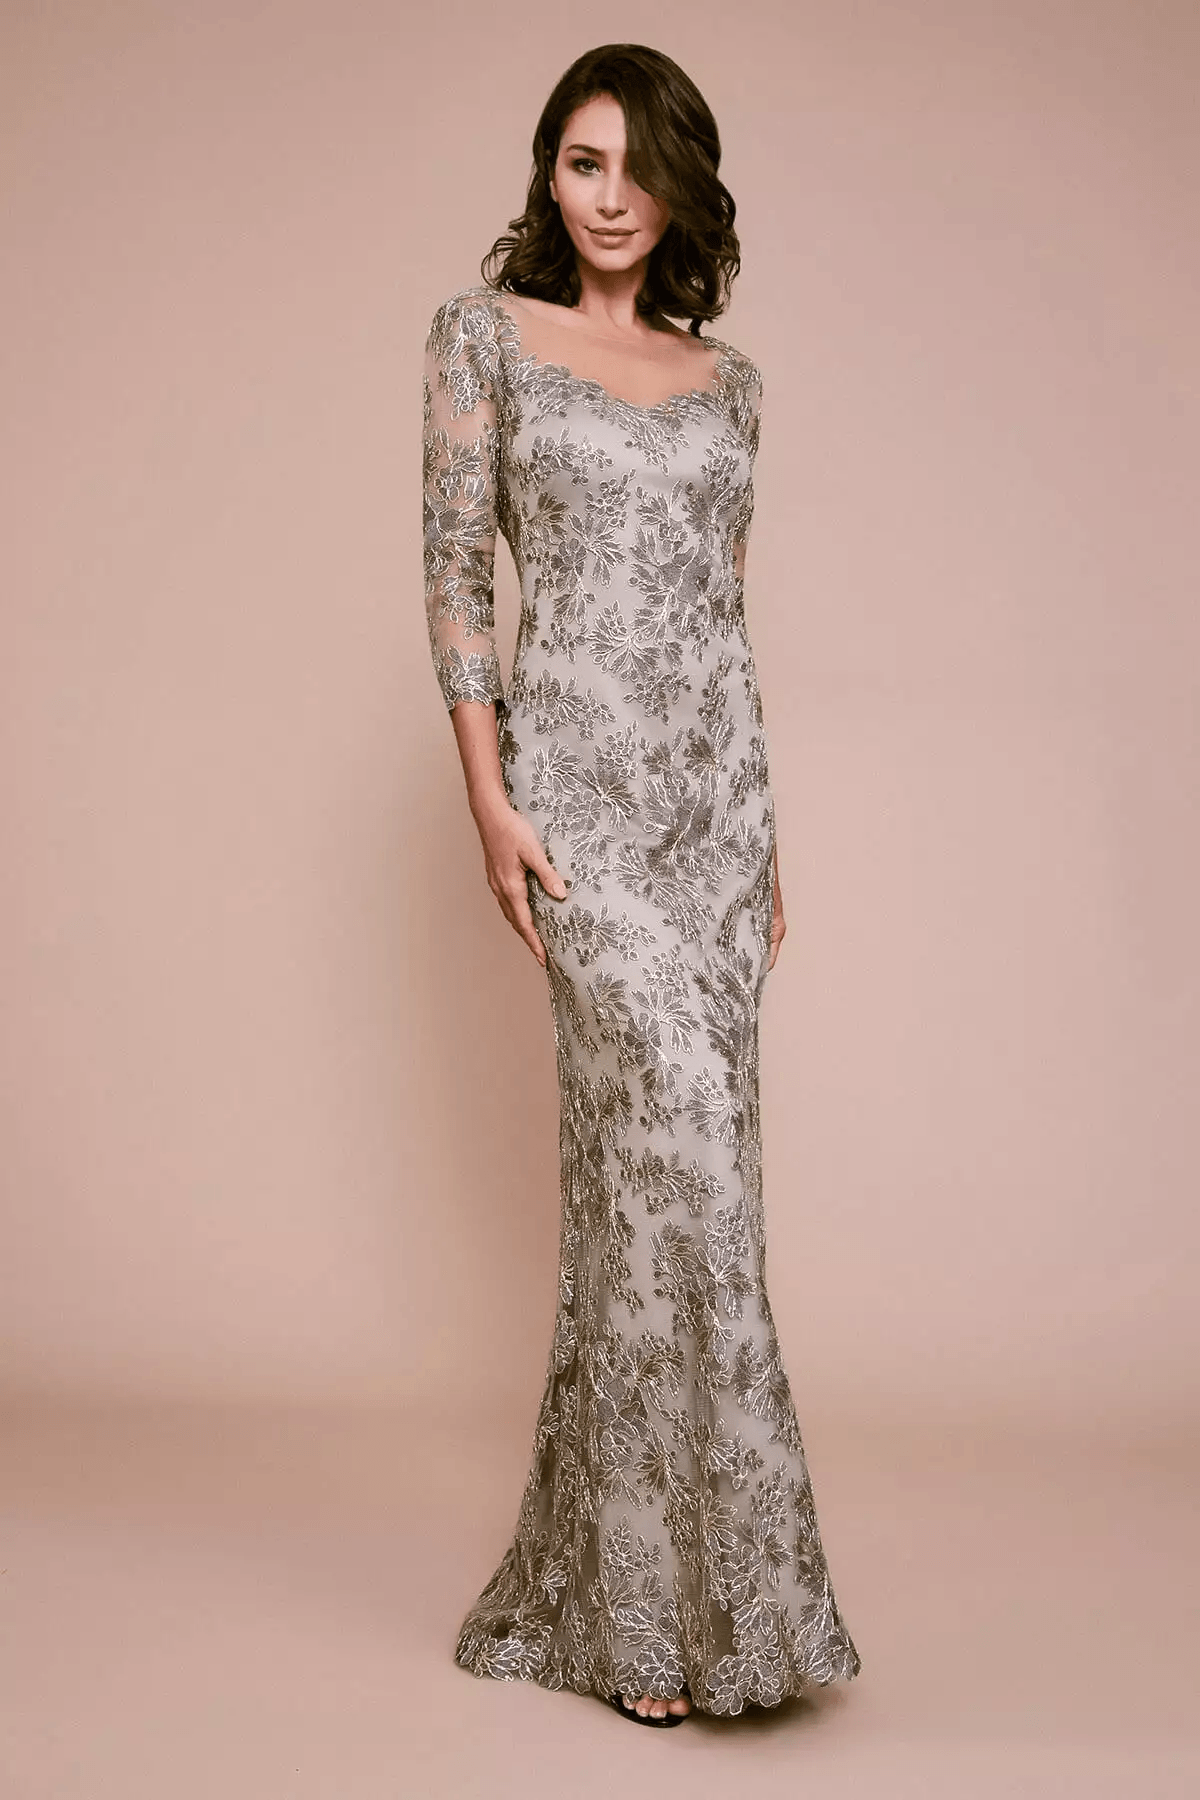 Outfits for Brides Mothers-20 Latest Mother of the Bride Dresses